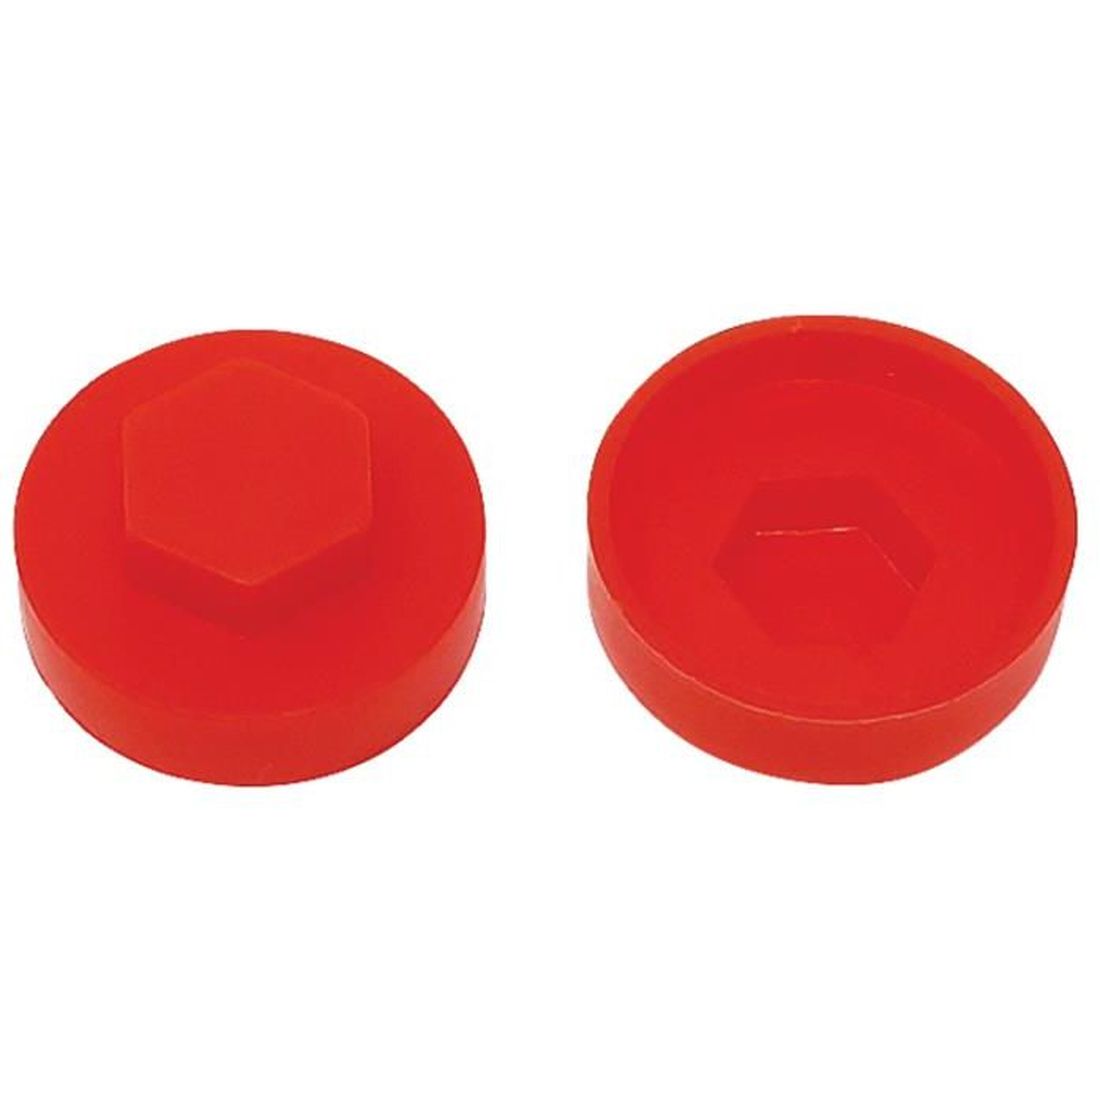 ForgeFix TechFast Cover Cap Poppy Red 16mm (Pack 100)                                    